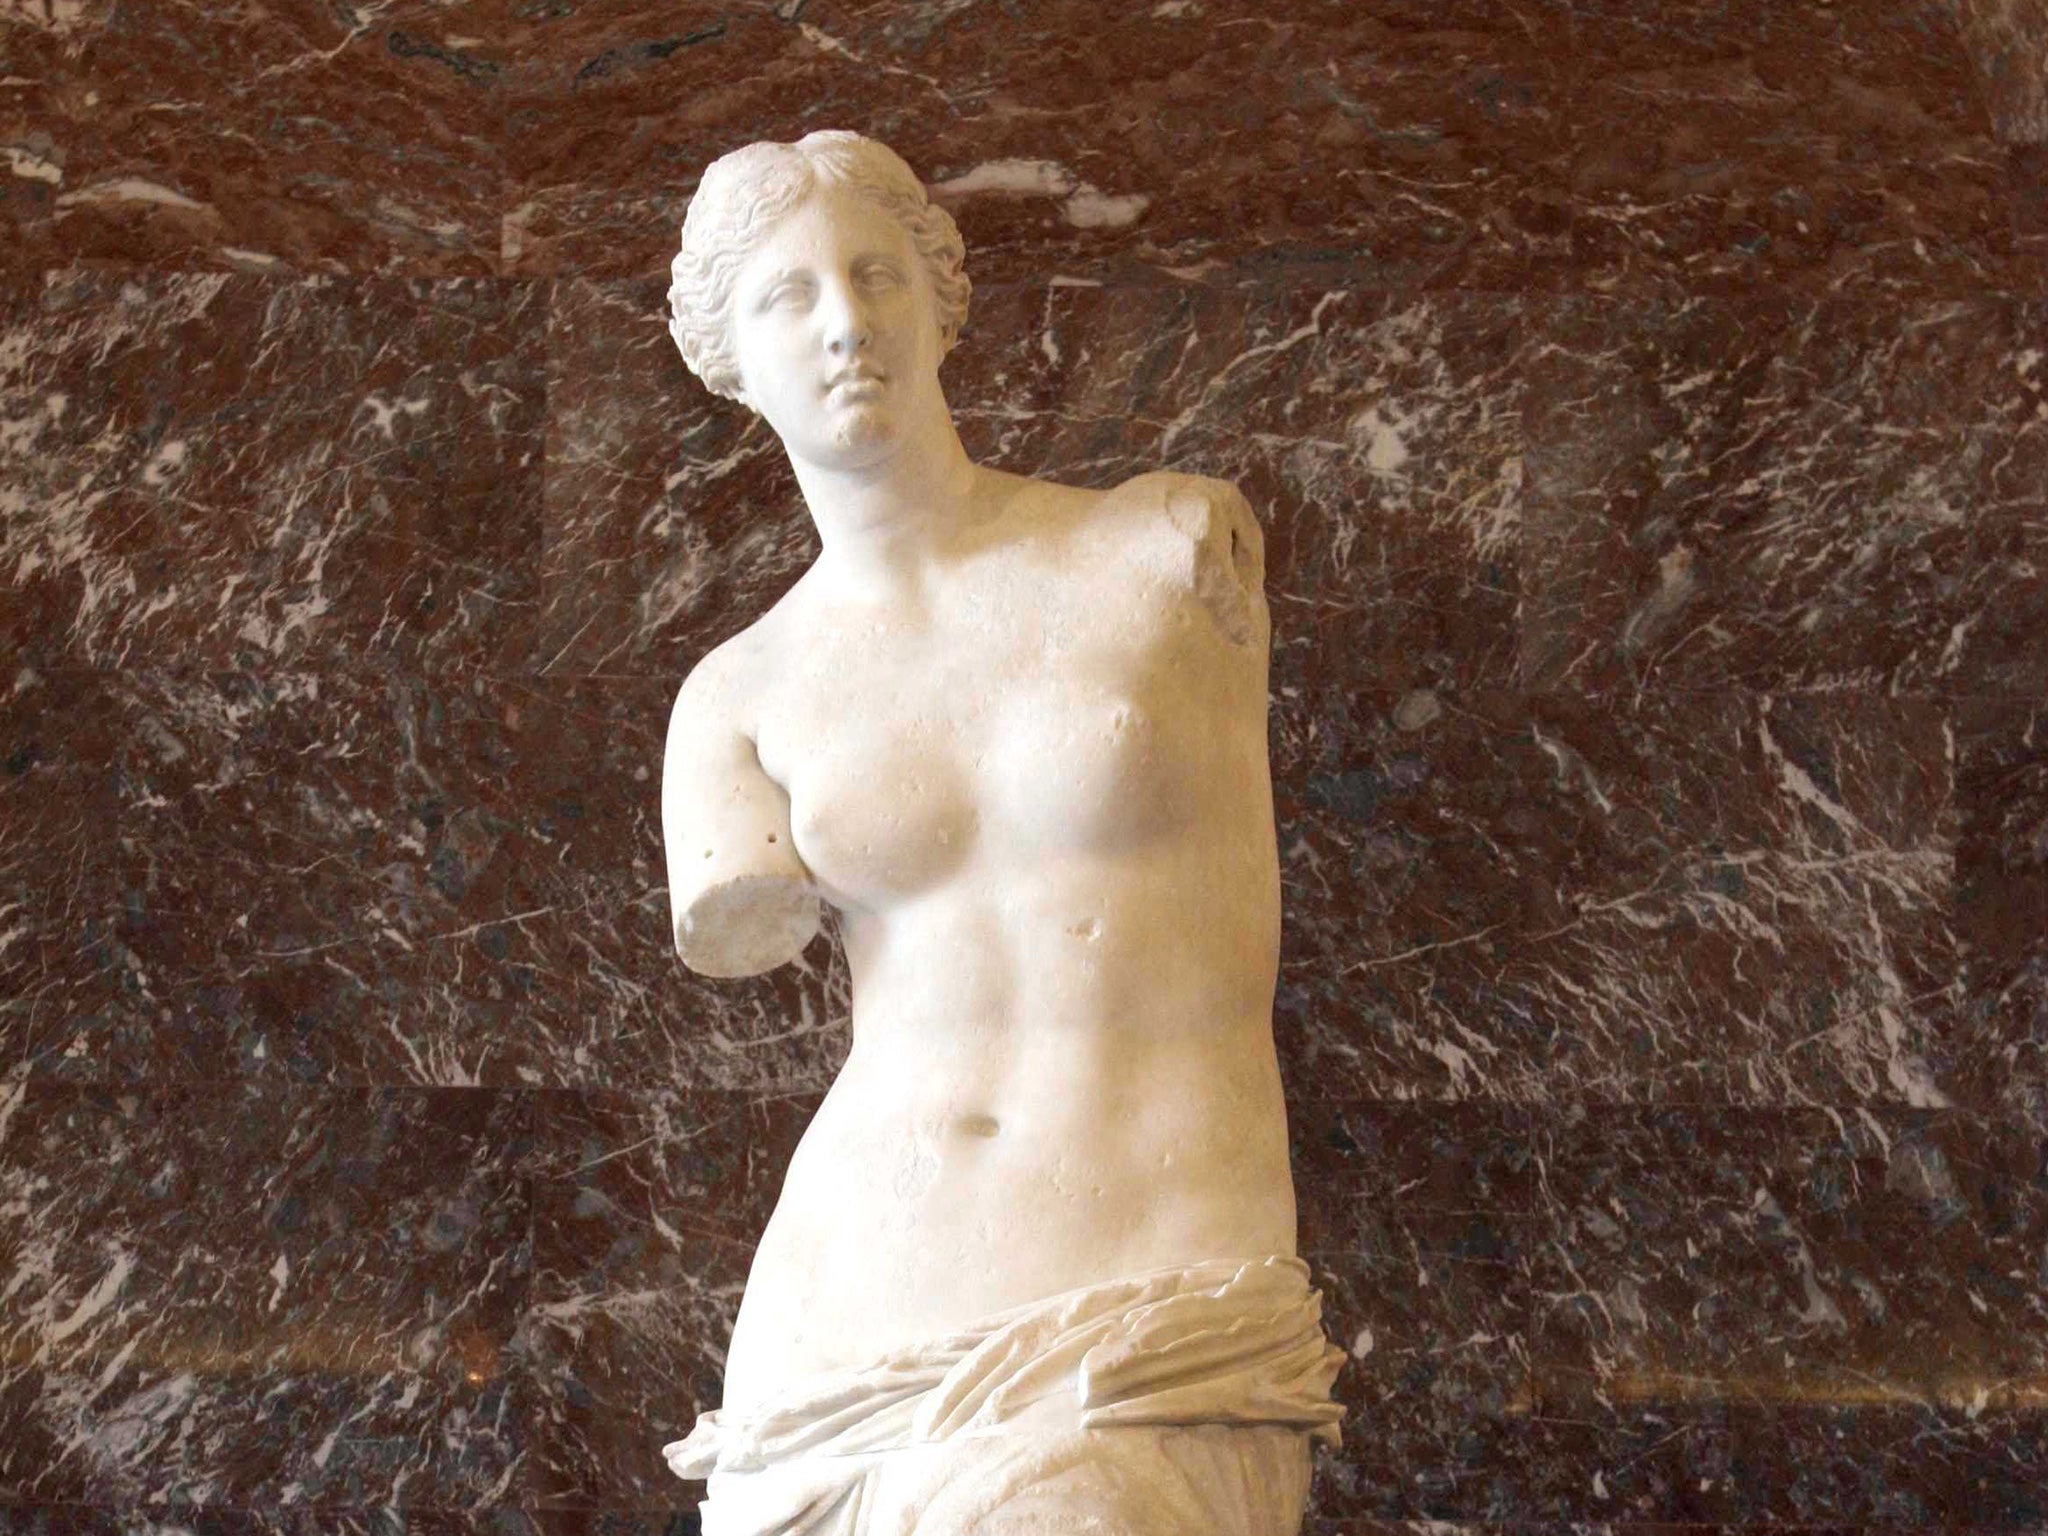 The Venus de Milo, credited to Alexandros of Antiochus, on display in the Louvre